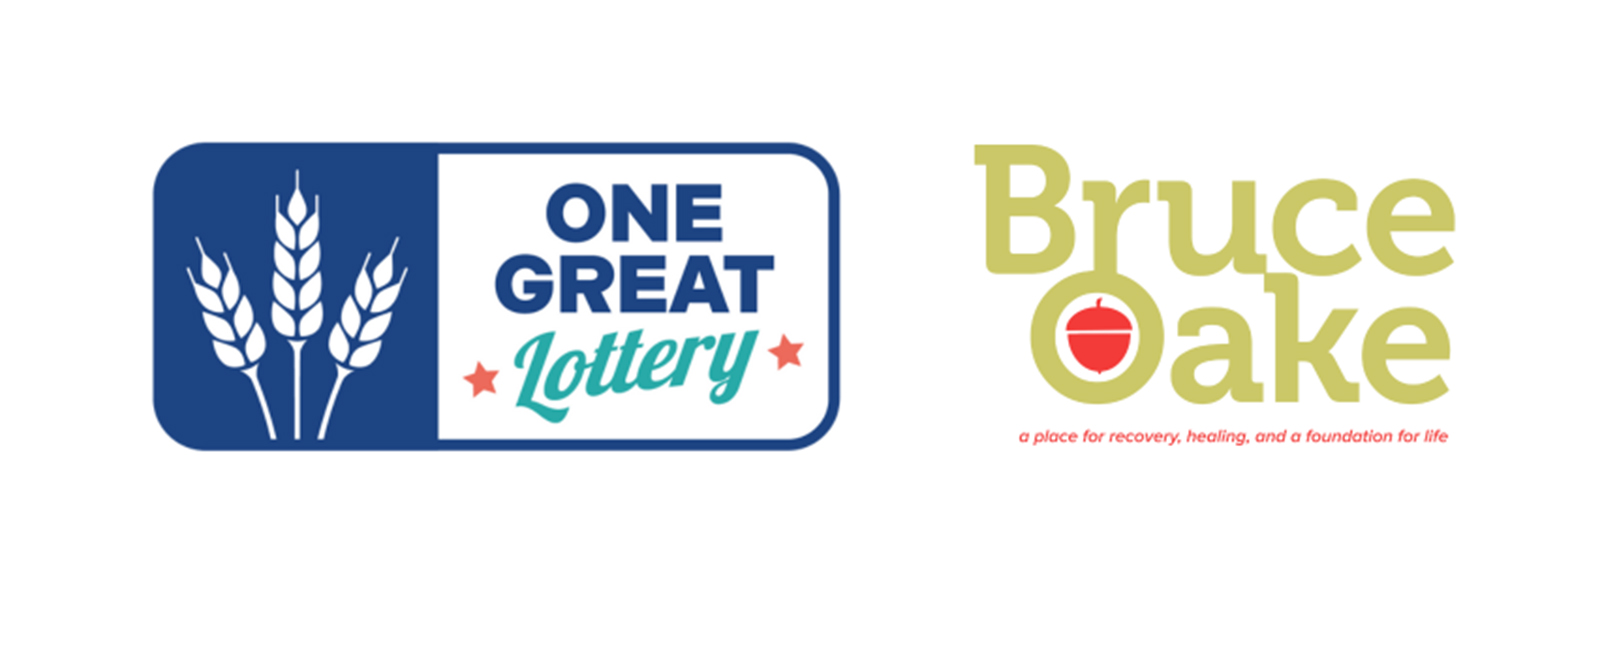 Get your tickets for One Great Lottery!